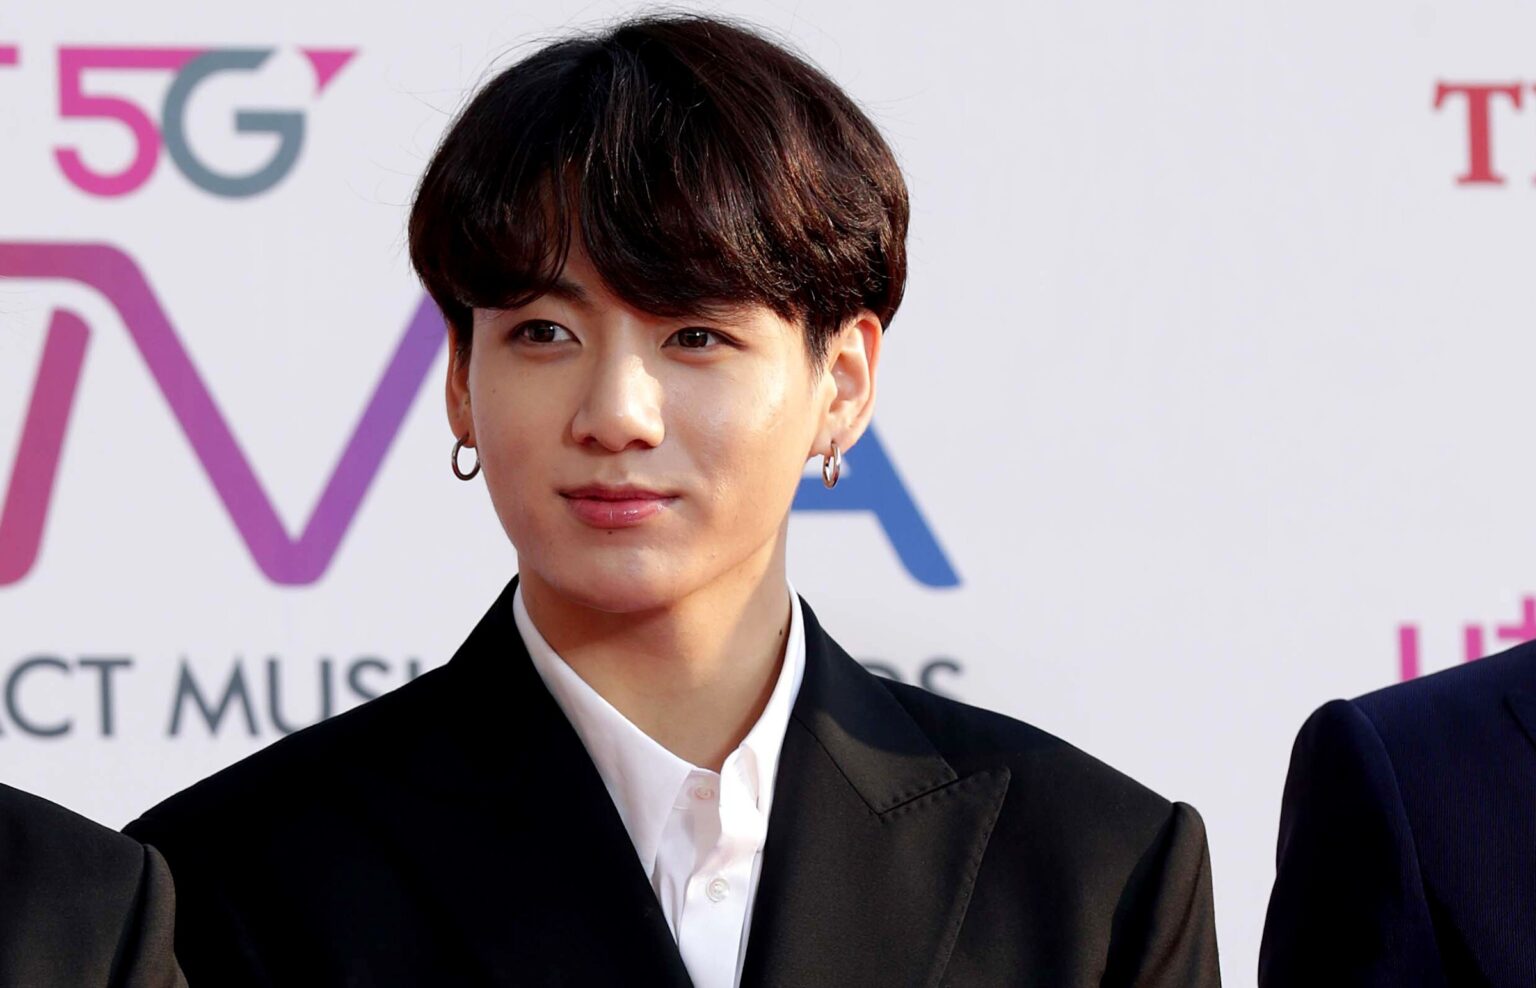 Here are all the cutest facts about Jungkook from BTS. If you don’t chuckle, you might want to check if you have a pulse.